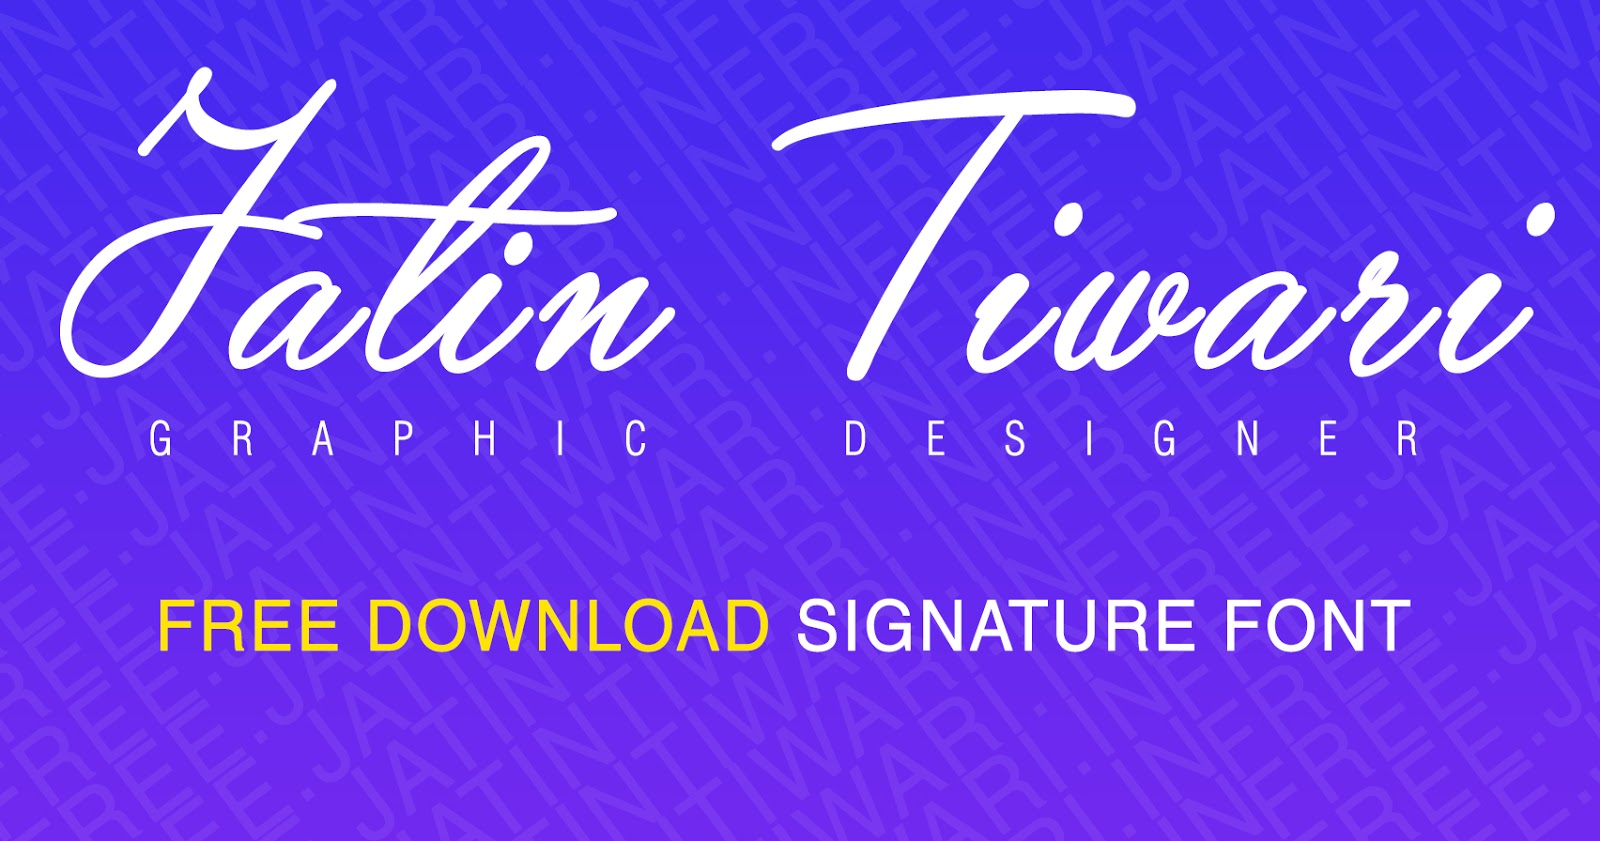 Download Free PSDs | Fonts | Designs | Mockups | and much more